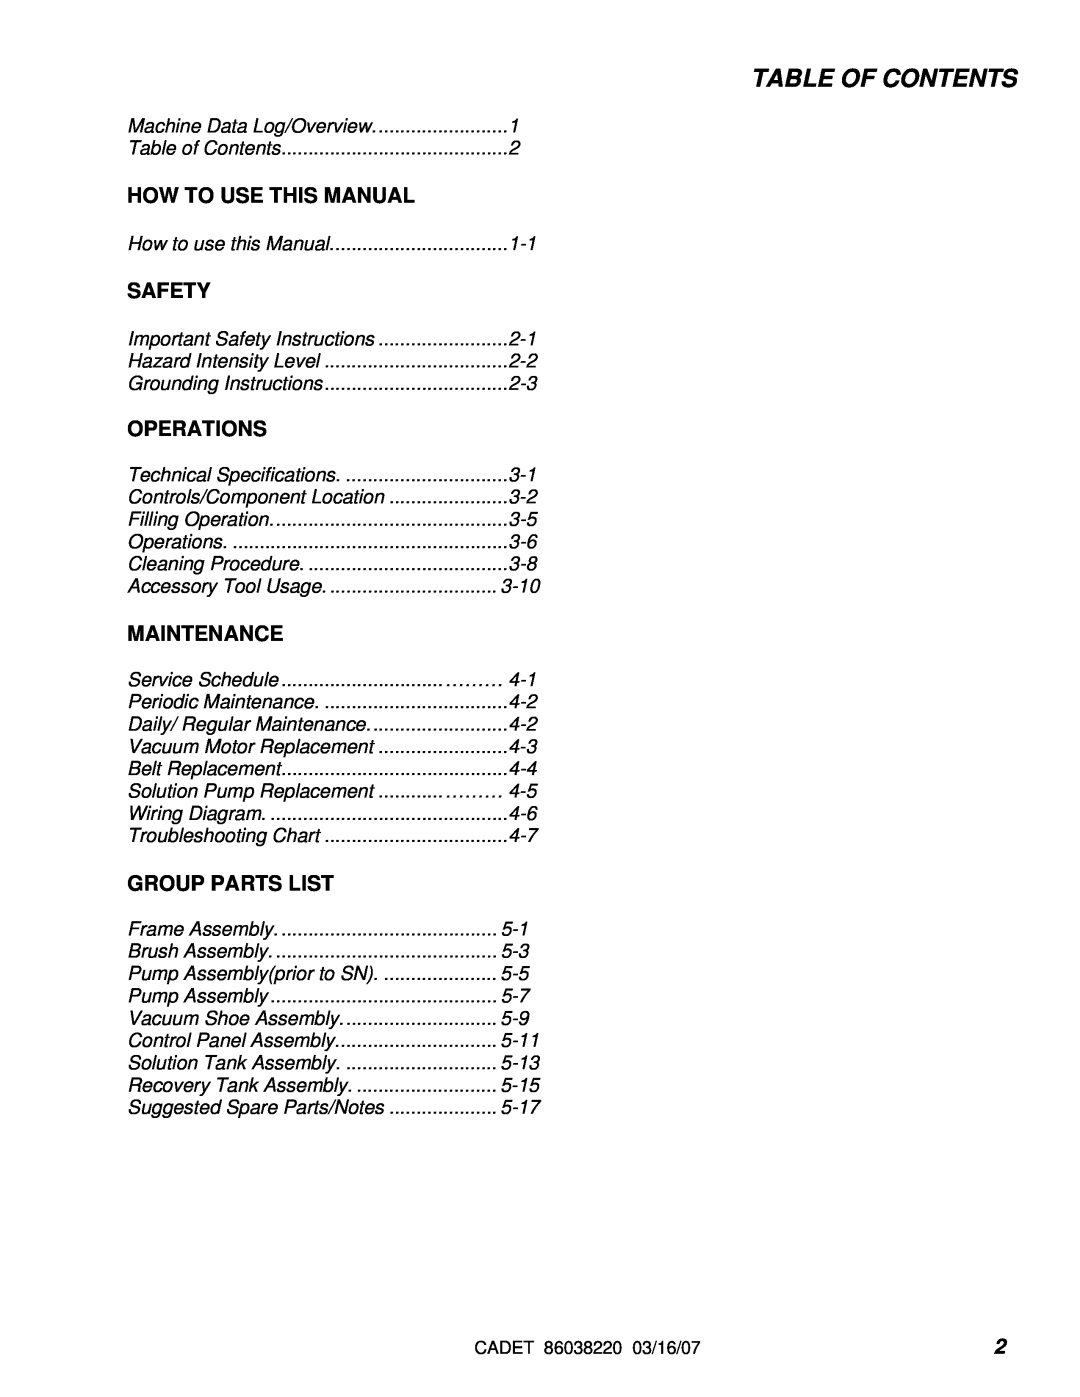 Windsor cdt7 10080220 manual Table Of Contents, How To Use This Manual, Safety, Operations, Maintenance, Group Parts List 